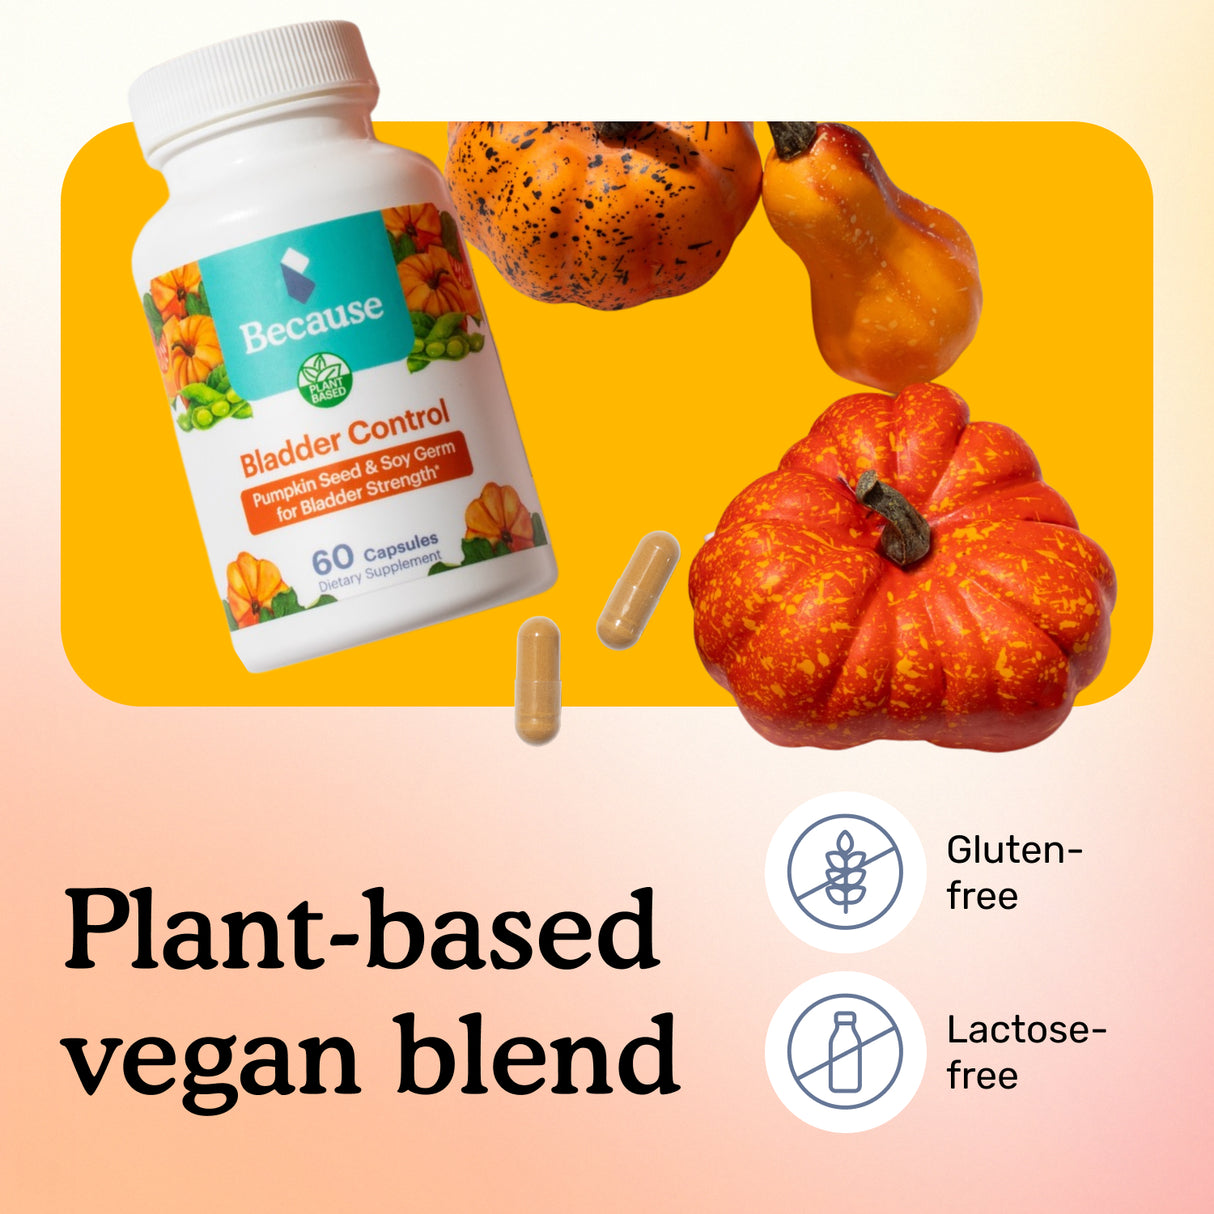 Plant-based vegan blend. Gluten-free and Lactose-free